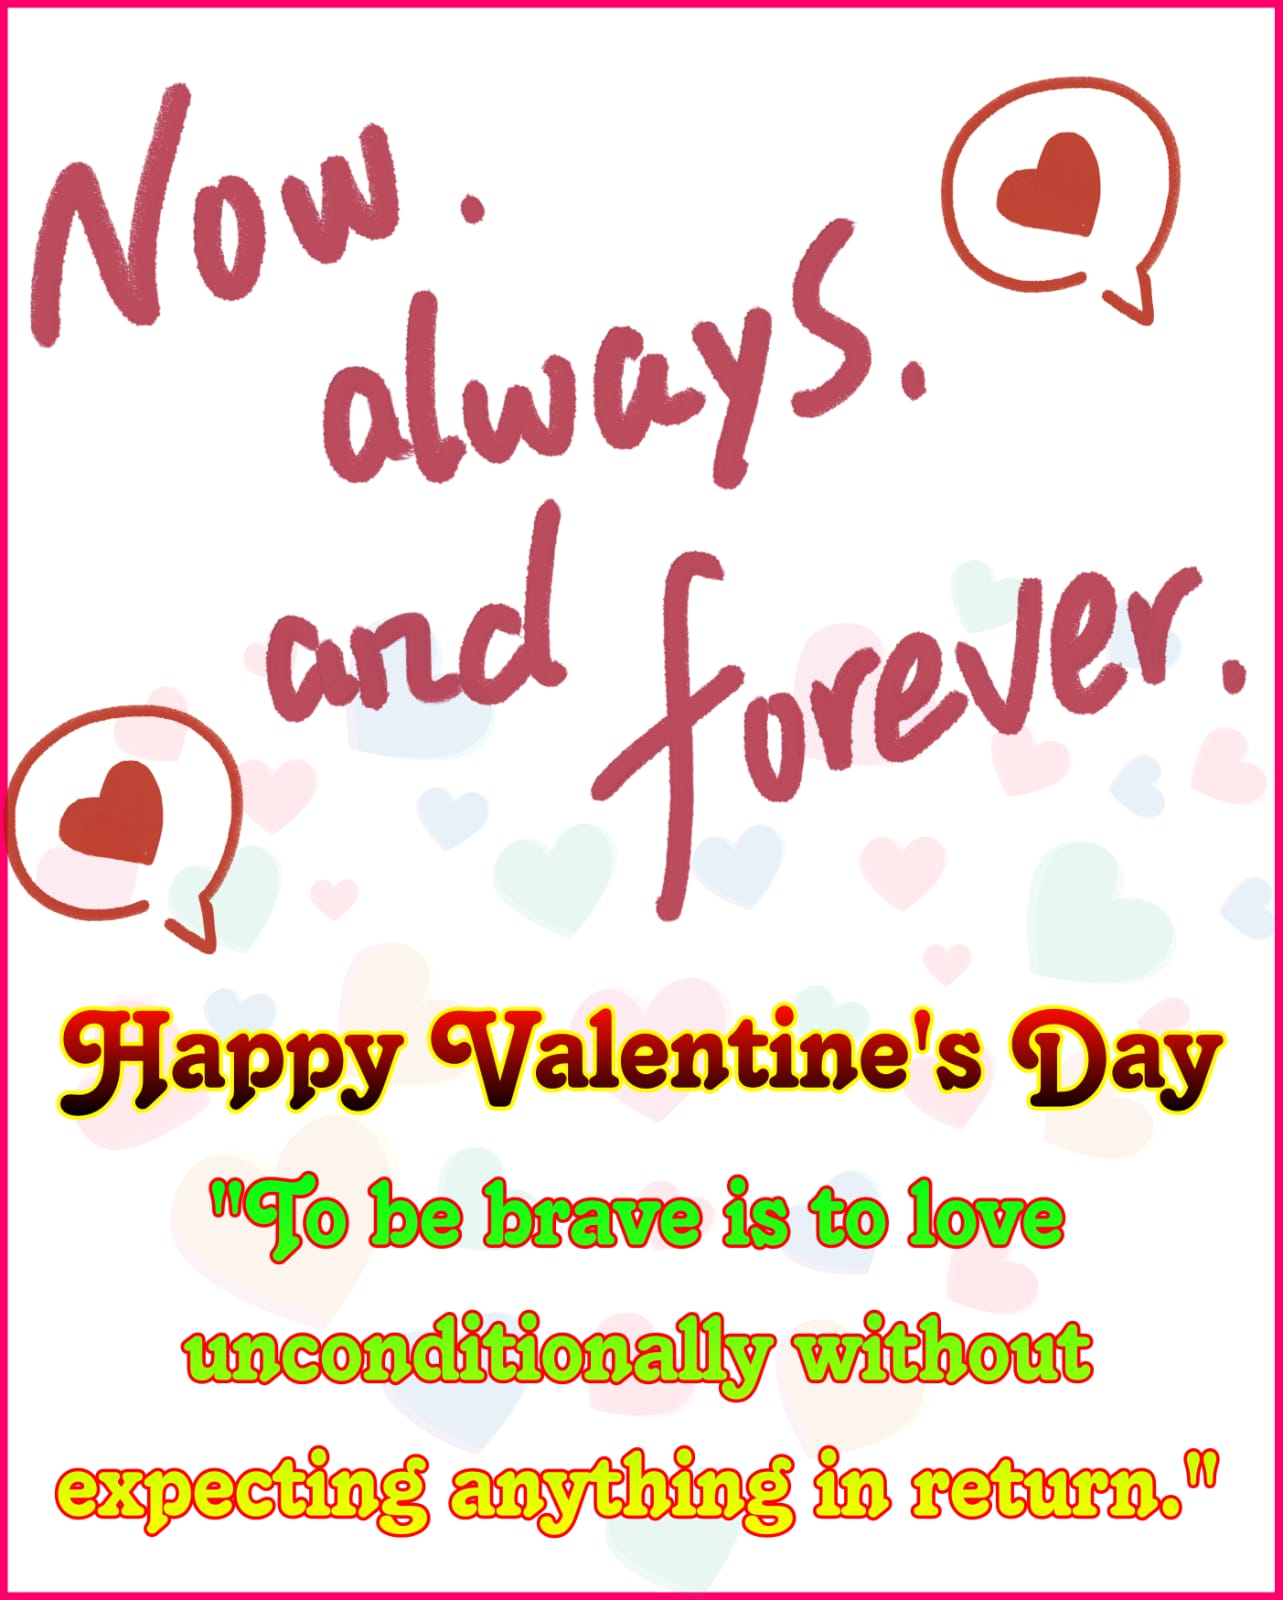 Happy Valentine's Day - Wishes - Images - Photos - Wallpapers